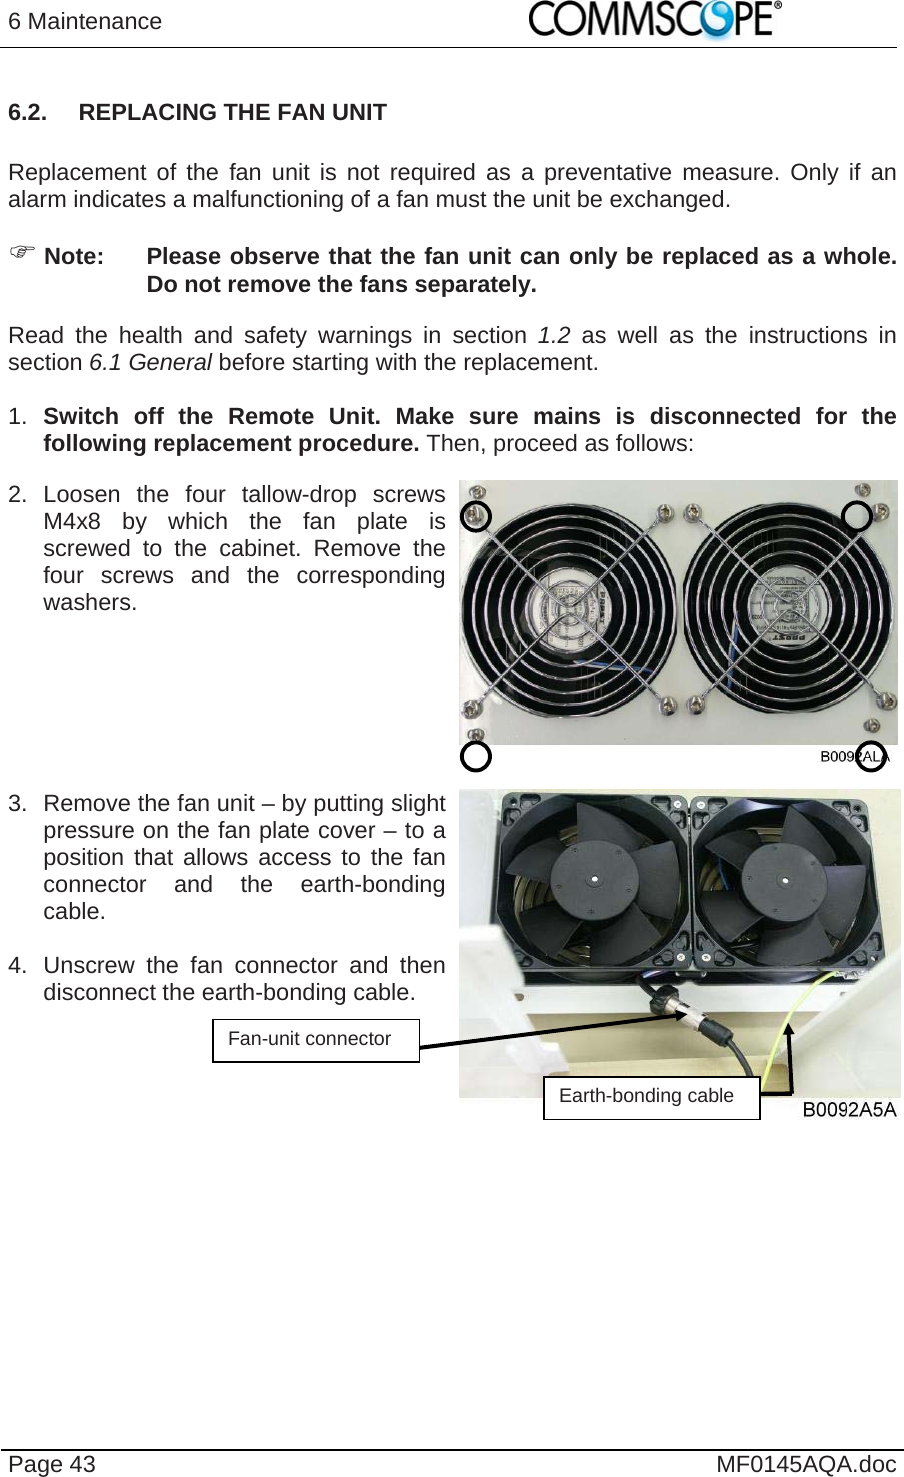 6 Maintenance    Page 43  MF0145AQA.doc 6.2.  REPLACING THE FAN UNIT  Replacement of the fan unit is not required as a preventative measure. Only if an alarm indicates a malfunctioning of a fan must the unit be exchanged.  Note:  Please observe that the fan unit can only be replaced as a whole. Do not remove the fans separately. Read the health and safety warnings in section 1.2  as well as the instructions in section 6.1 General before starting with the replacement.   1.  Switch off the Remote Unit. Make sure mains is disconnected for the following replacement procedure. Then, proceed as follows: 2. Loosen the four tallow-drop screws M4x8 by which the fan plate is screwed to the cabinet. Remove the four screws and the corresponding washers.    3.  Remove the fan unit – by putting slight pressure on the fan plate cover – to a position that allows access to the fan connector and the earth-bonding cable.   4.  Unscrew the fan connector and then disconnect the earth-bonding cable.      Fan-unit connector Earth-bonding cable 